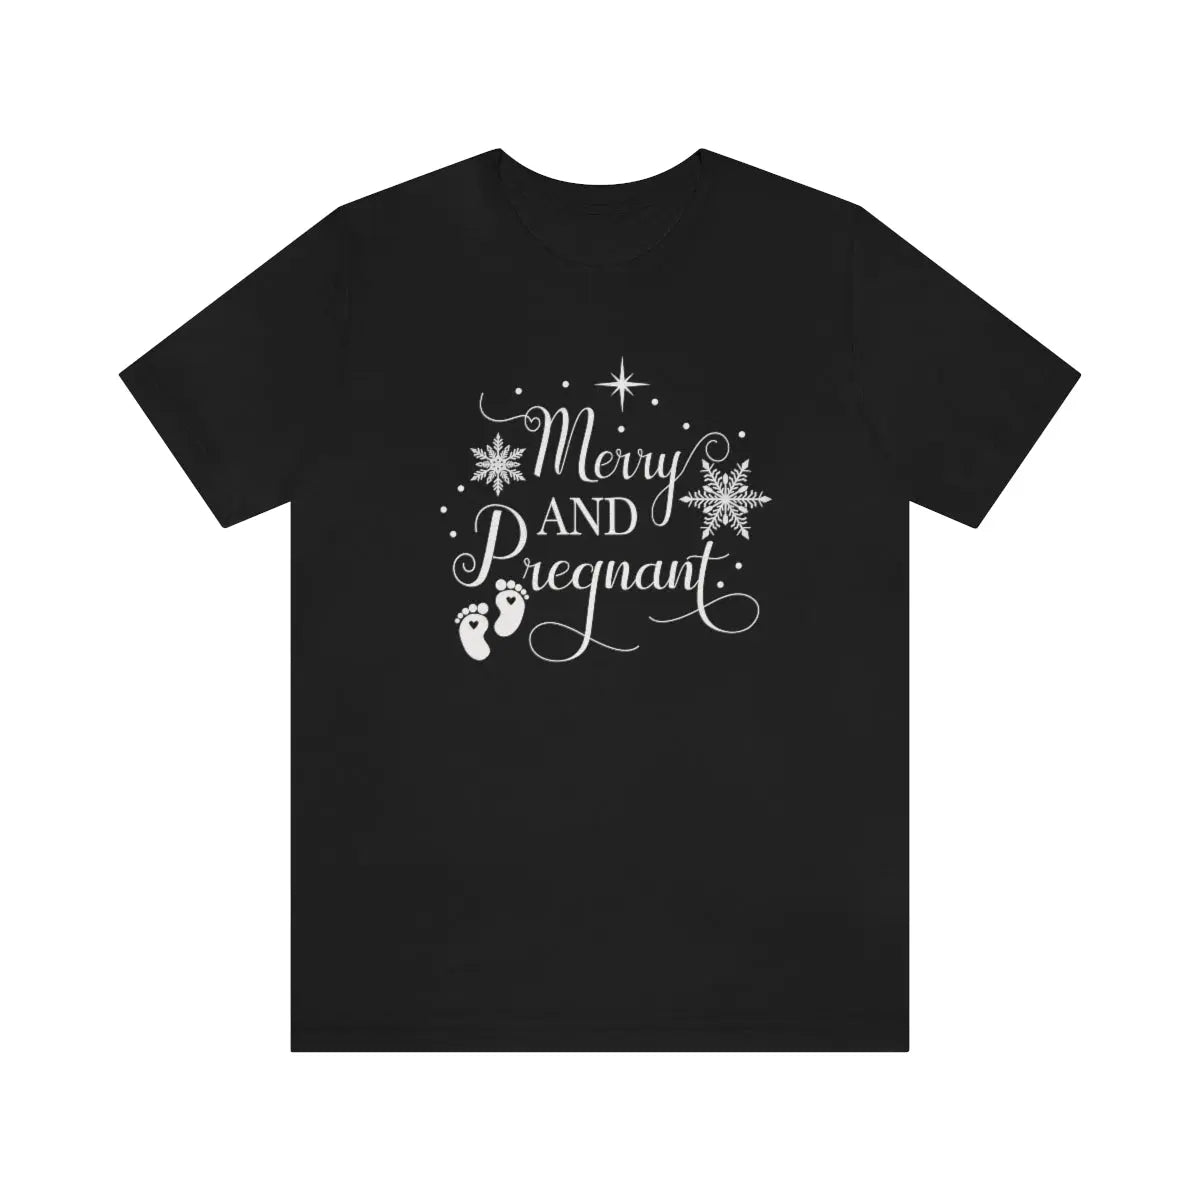 Merry and Pregnant Tee, Christmas Pregnancy Shirt, Pregnancy Announcement Tee, Holiday Maternity Shirt Printify